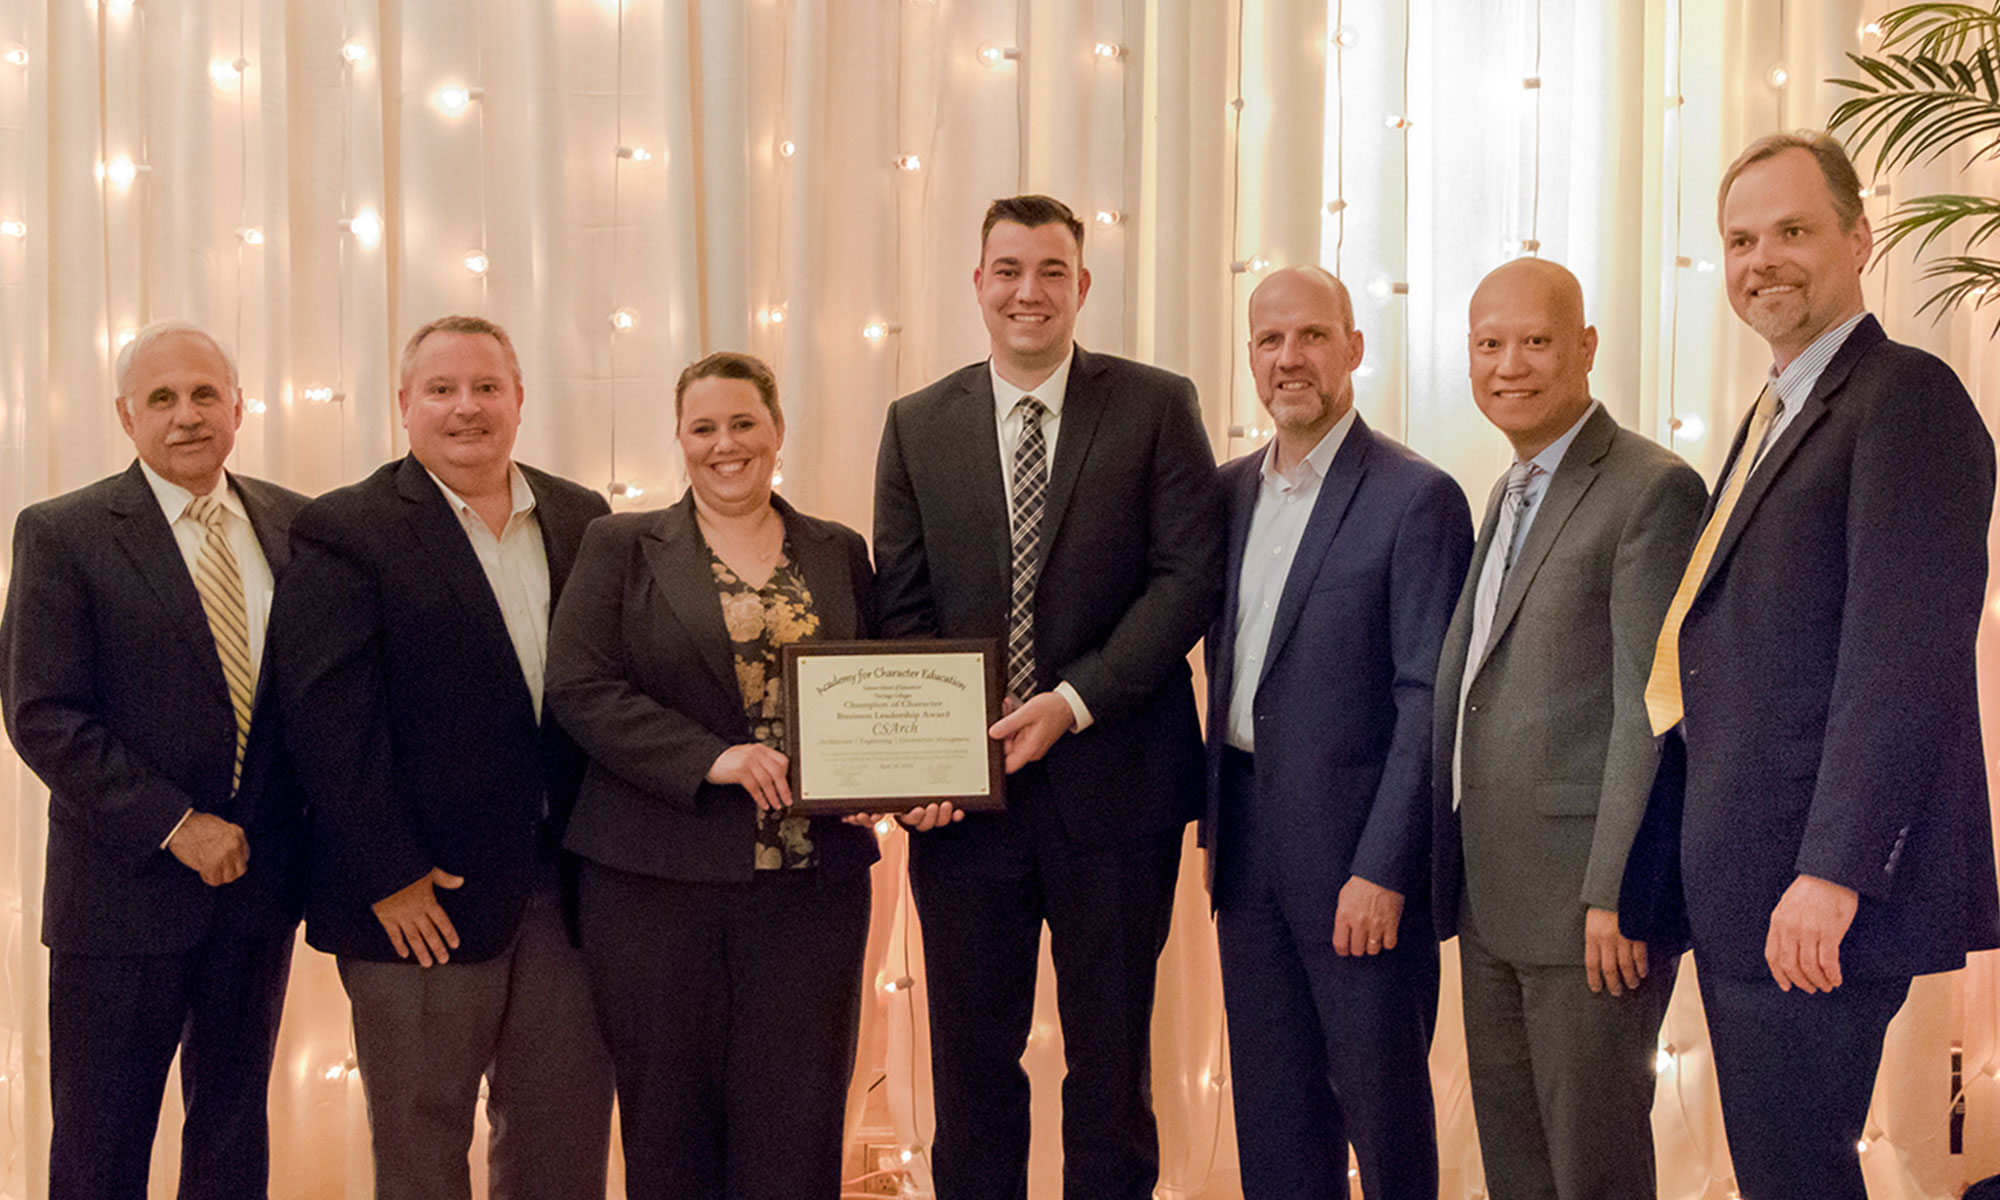 Business Leadership Award Recognizes CSArch's Commitment to Character Education